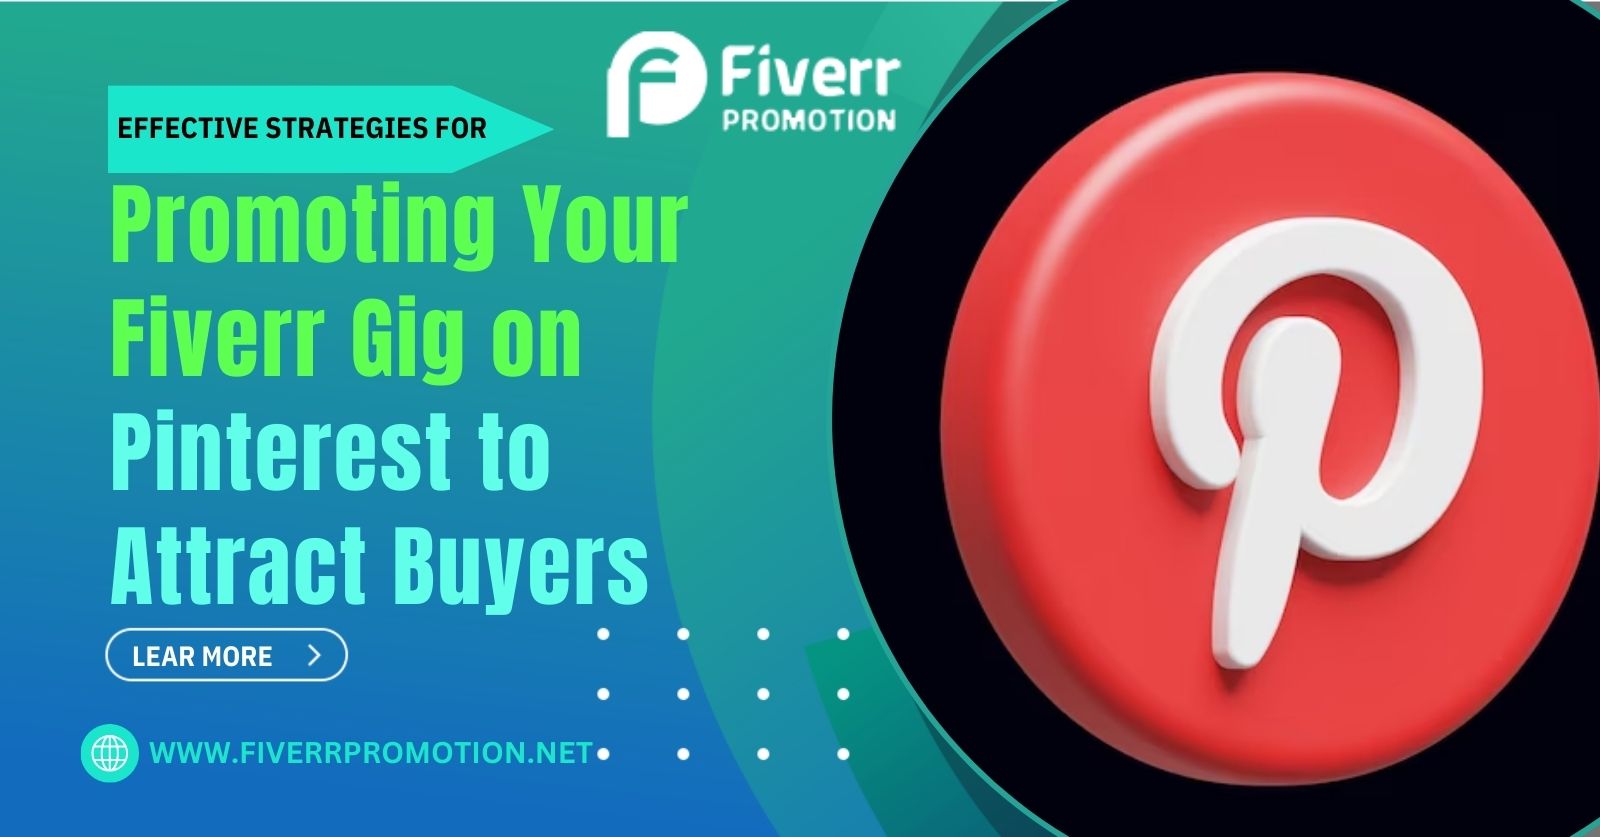 Effective Strategies for Promoting Your Fiverr Gig on Pinterest to Attract Buyers